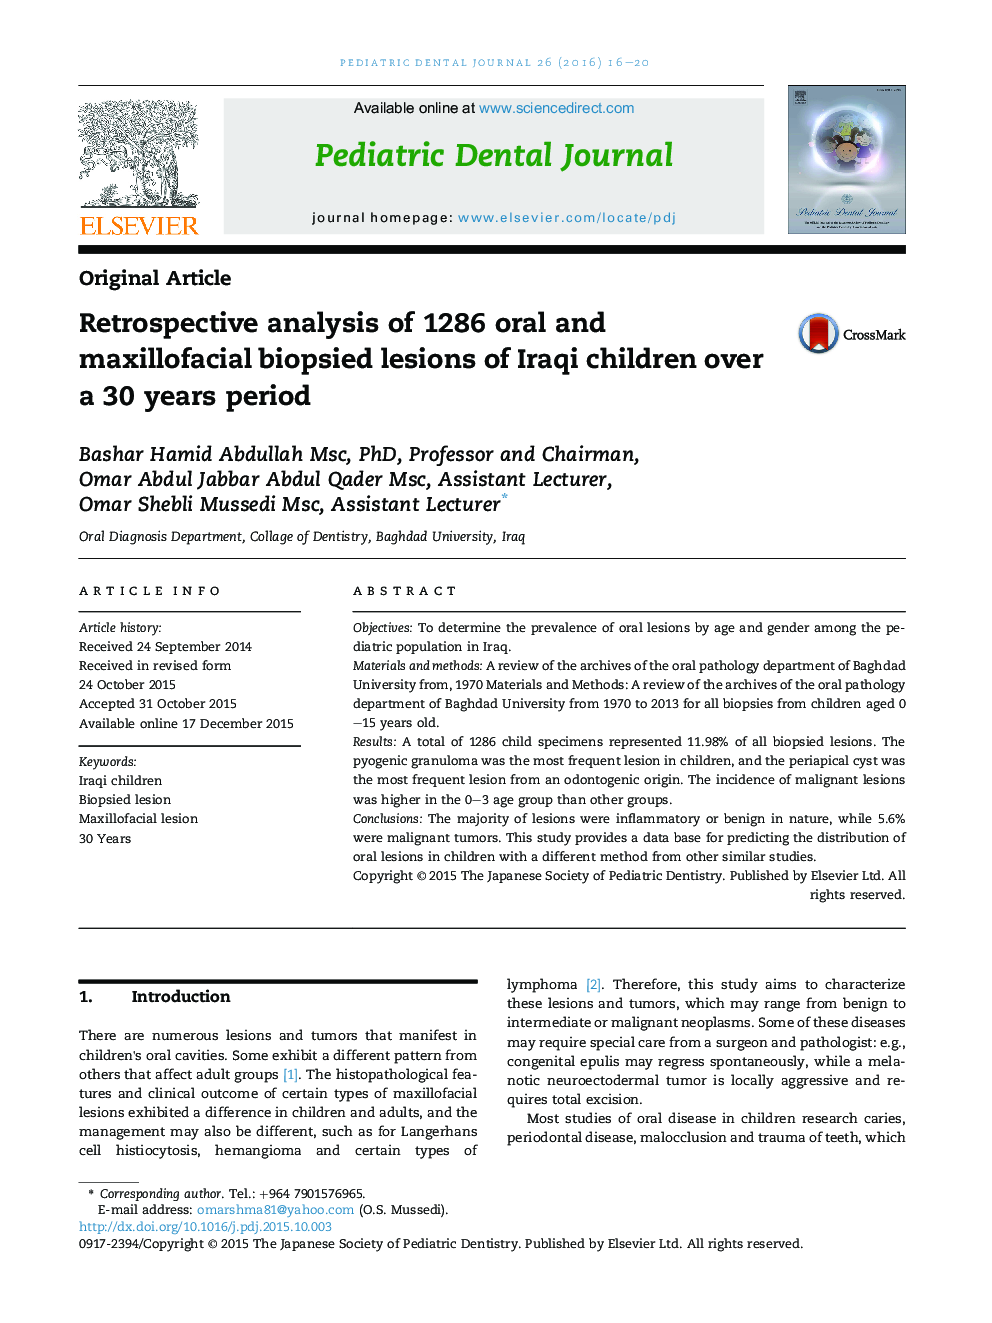 Retrospective analysis of 1286 oral and maxillofacial biopsied lesions of Iraqi children over a 30 years period